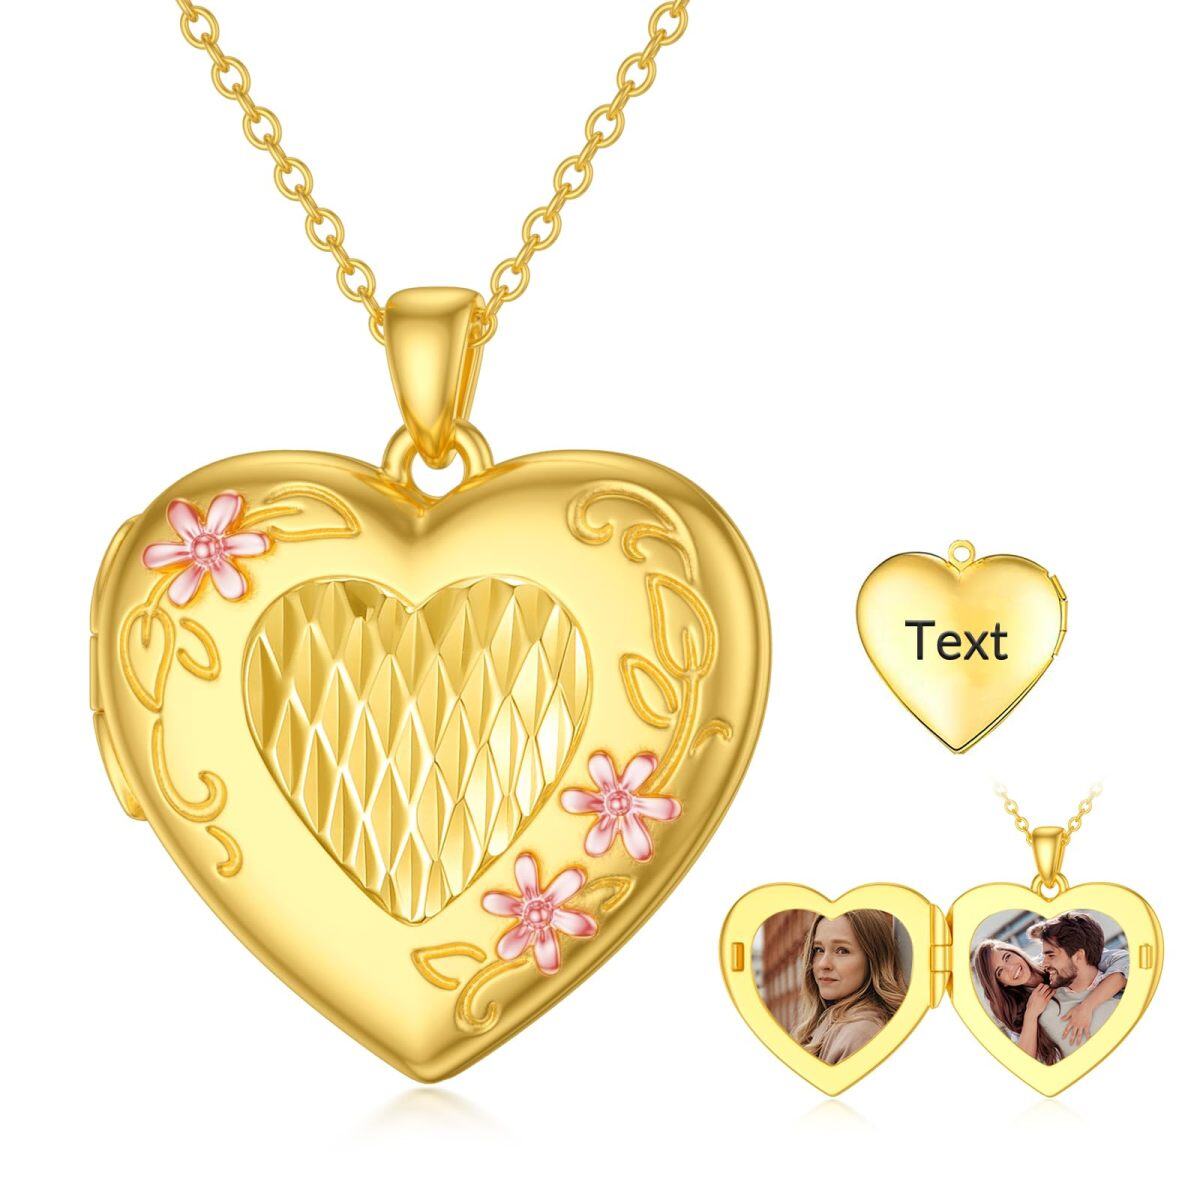 14K Gold Heart Personalized Photo Locket Necklace with Engraved Word-1